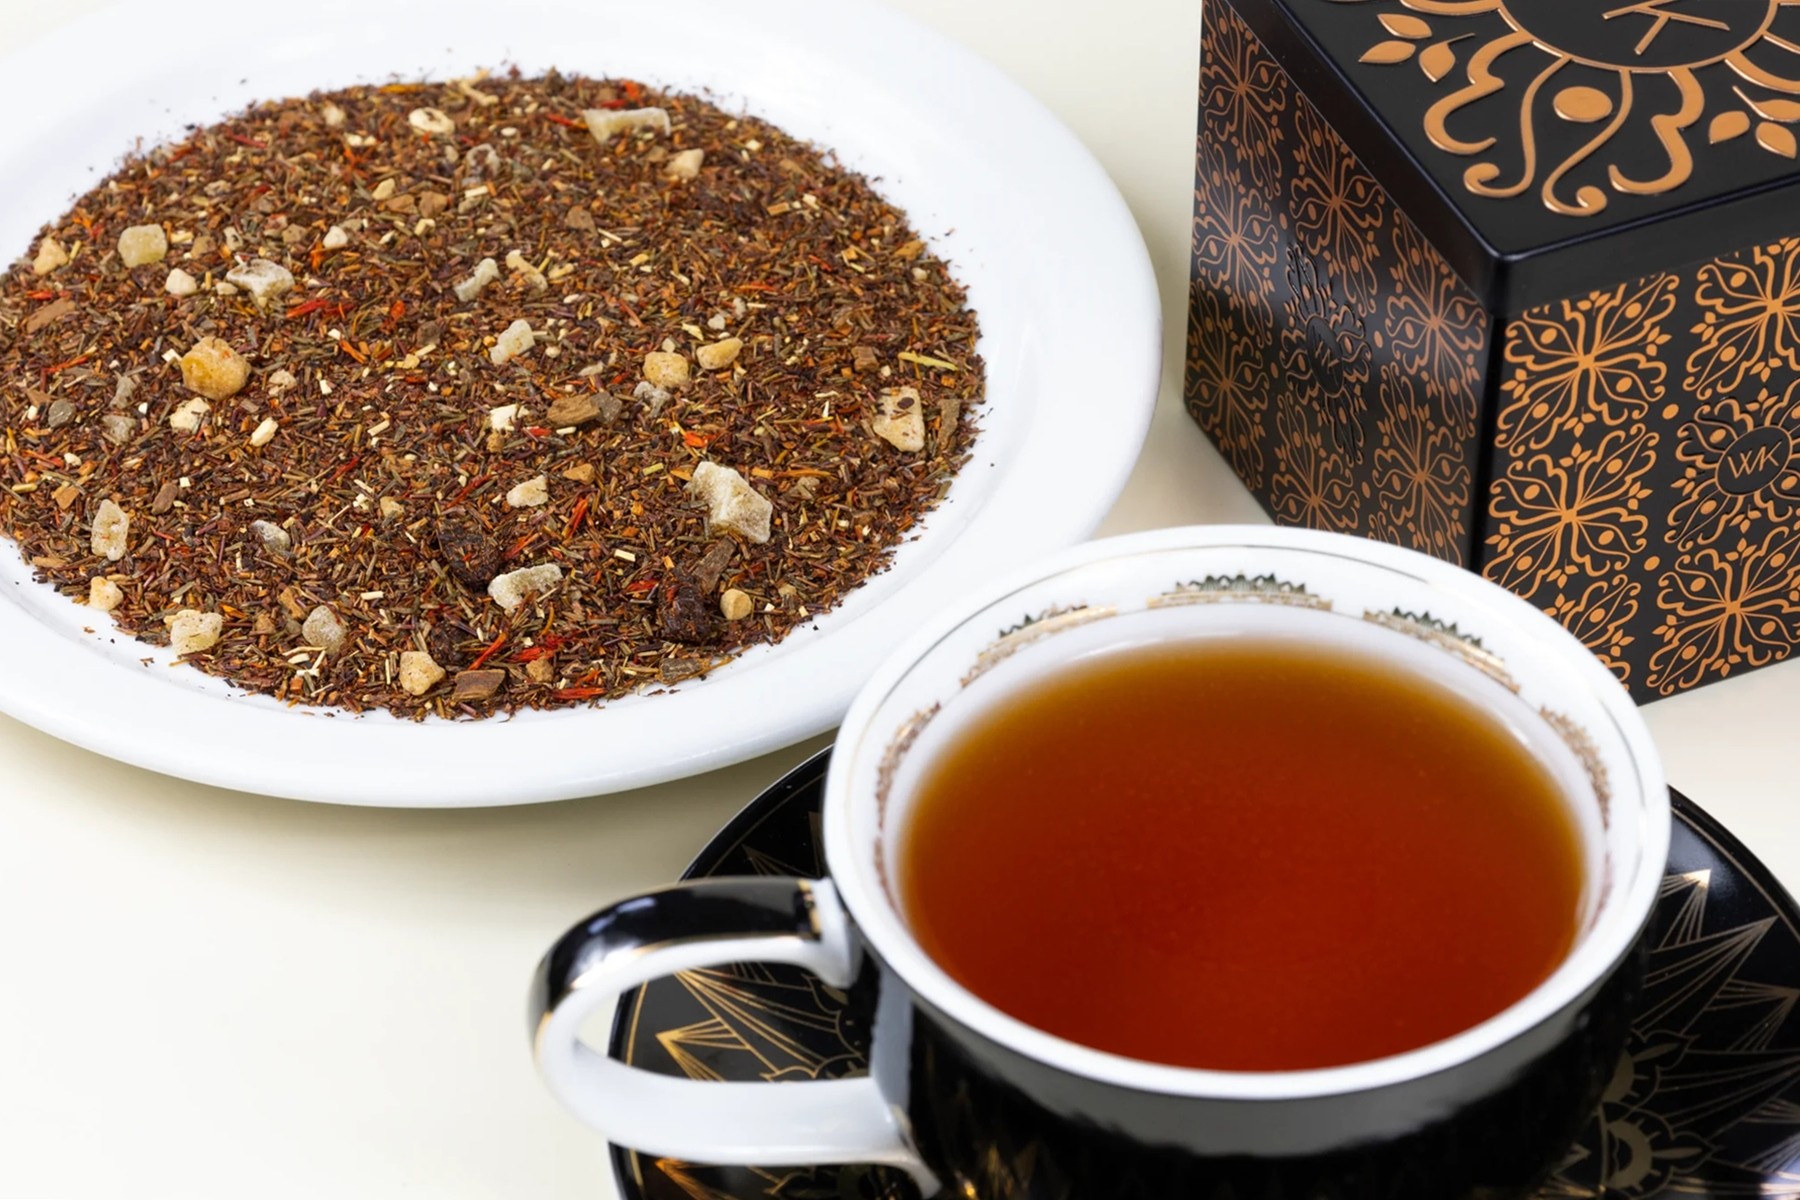 The Whistling Kettle: The Teas and Tea Gifts You'll Love